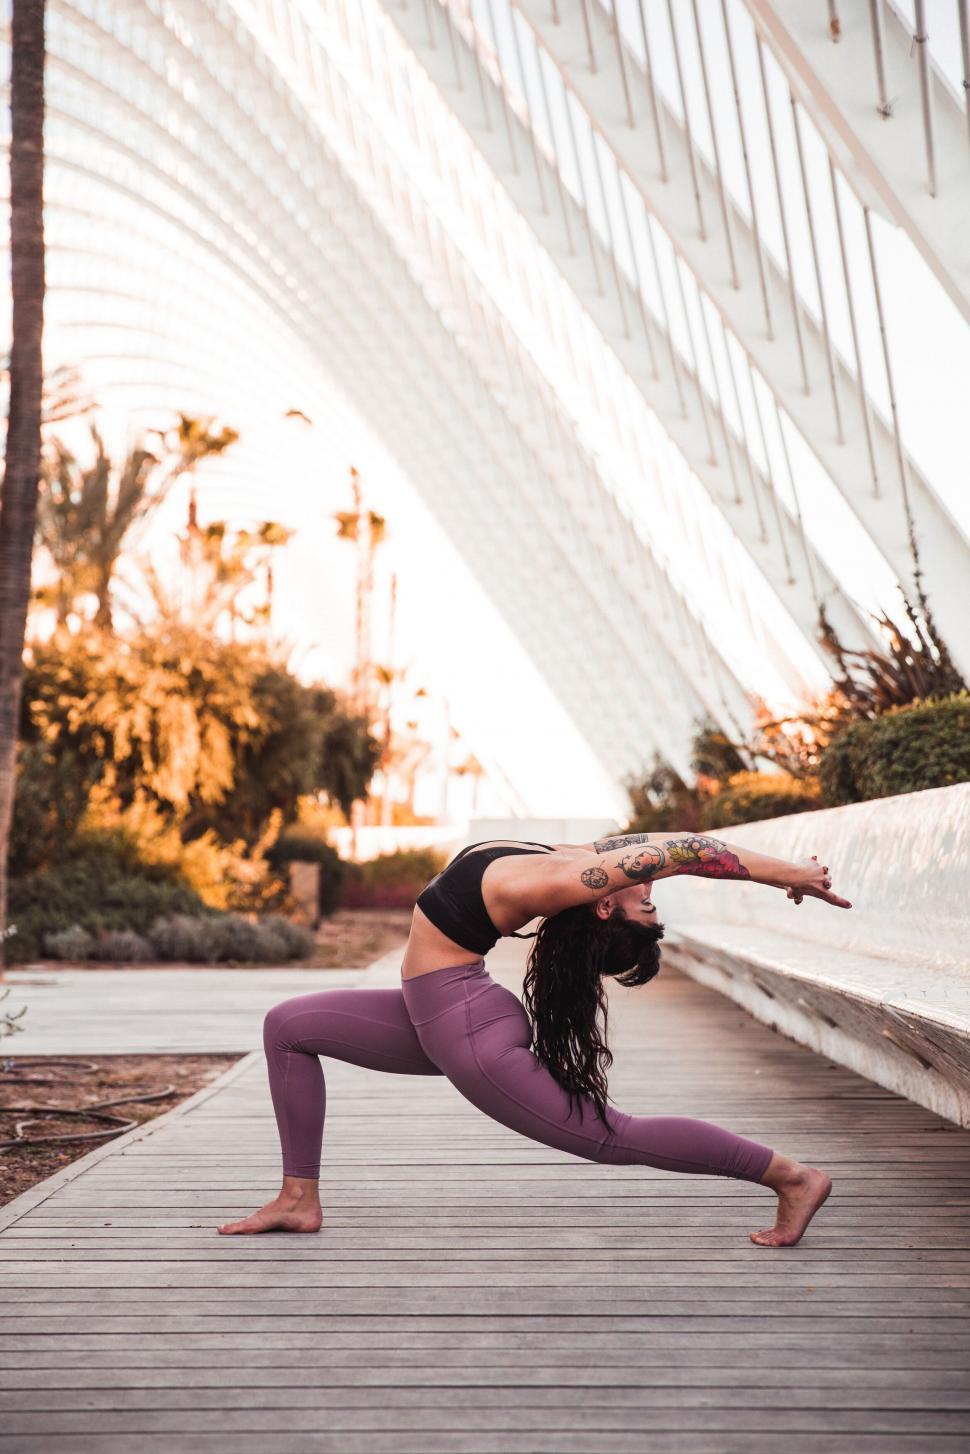 Free Image of Yoga practitioner in a modern urban setting 